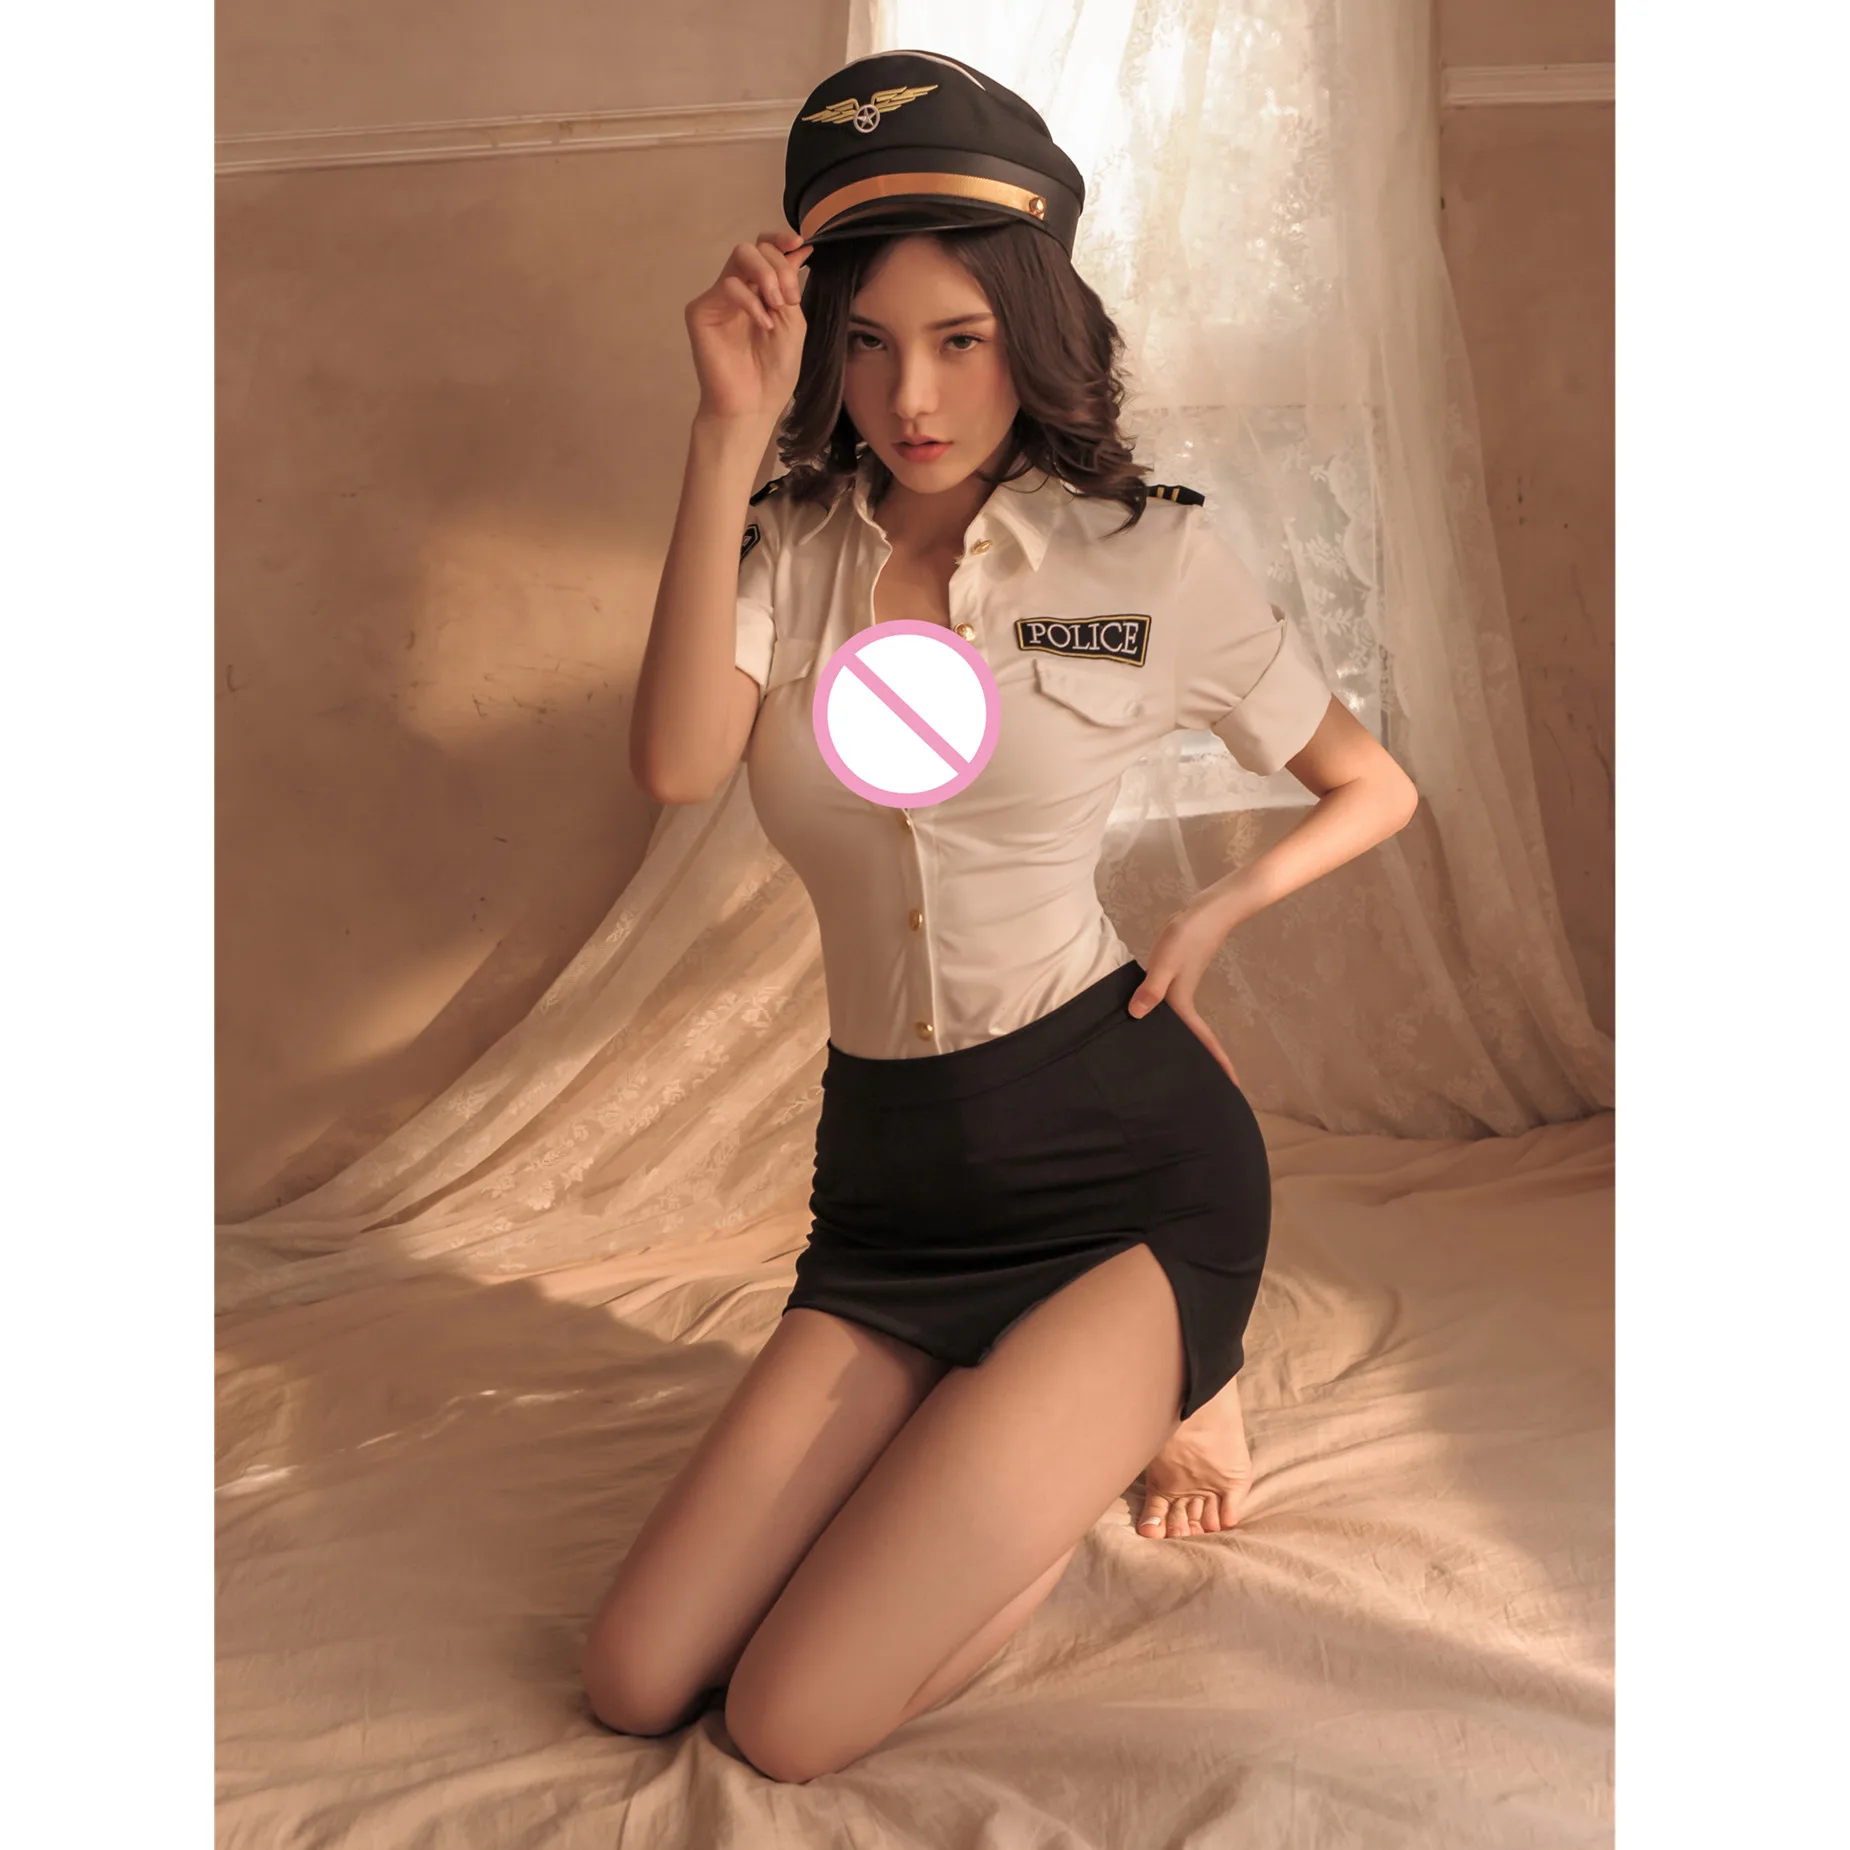 

Sexy Lingerie for Women V Neck Temptation Police Uniform Officer Policewoman Nightclub Role Play Party Couple Fun Skirt Suit